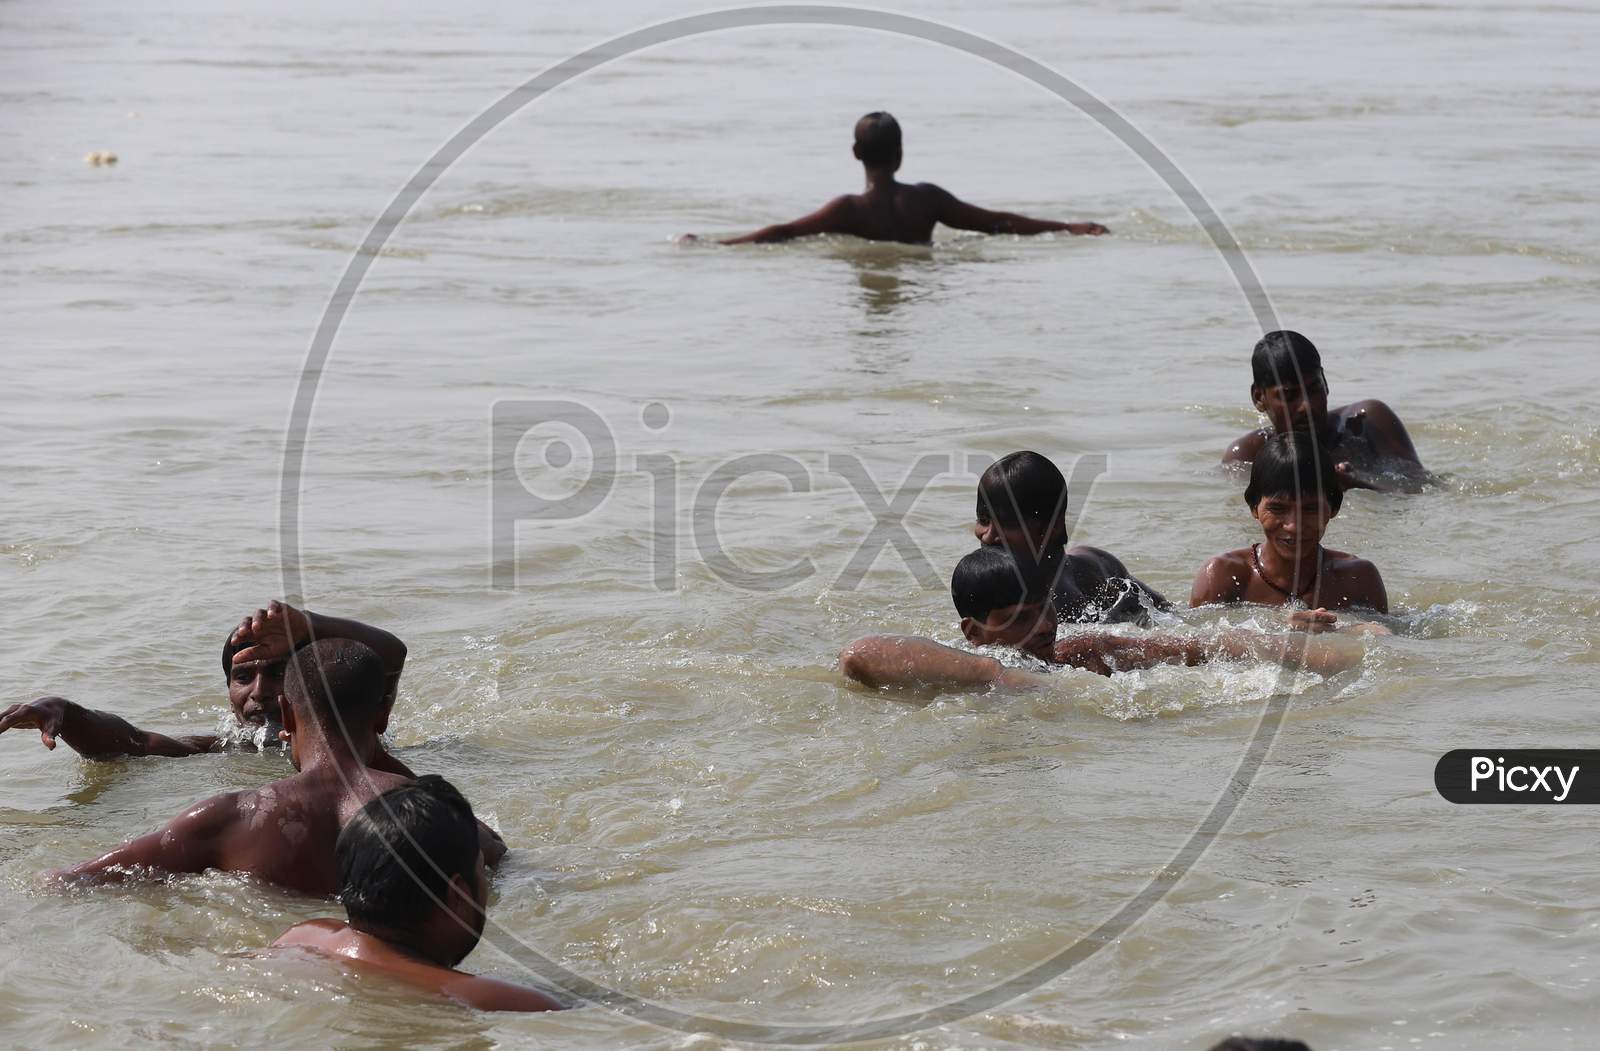 Hindu Devotees Taking Holy Dip in Triveni Sangam River On a Hot Summer Day in Prayagraj on May 30,2020